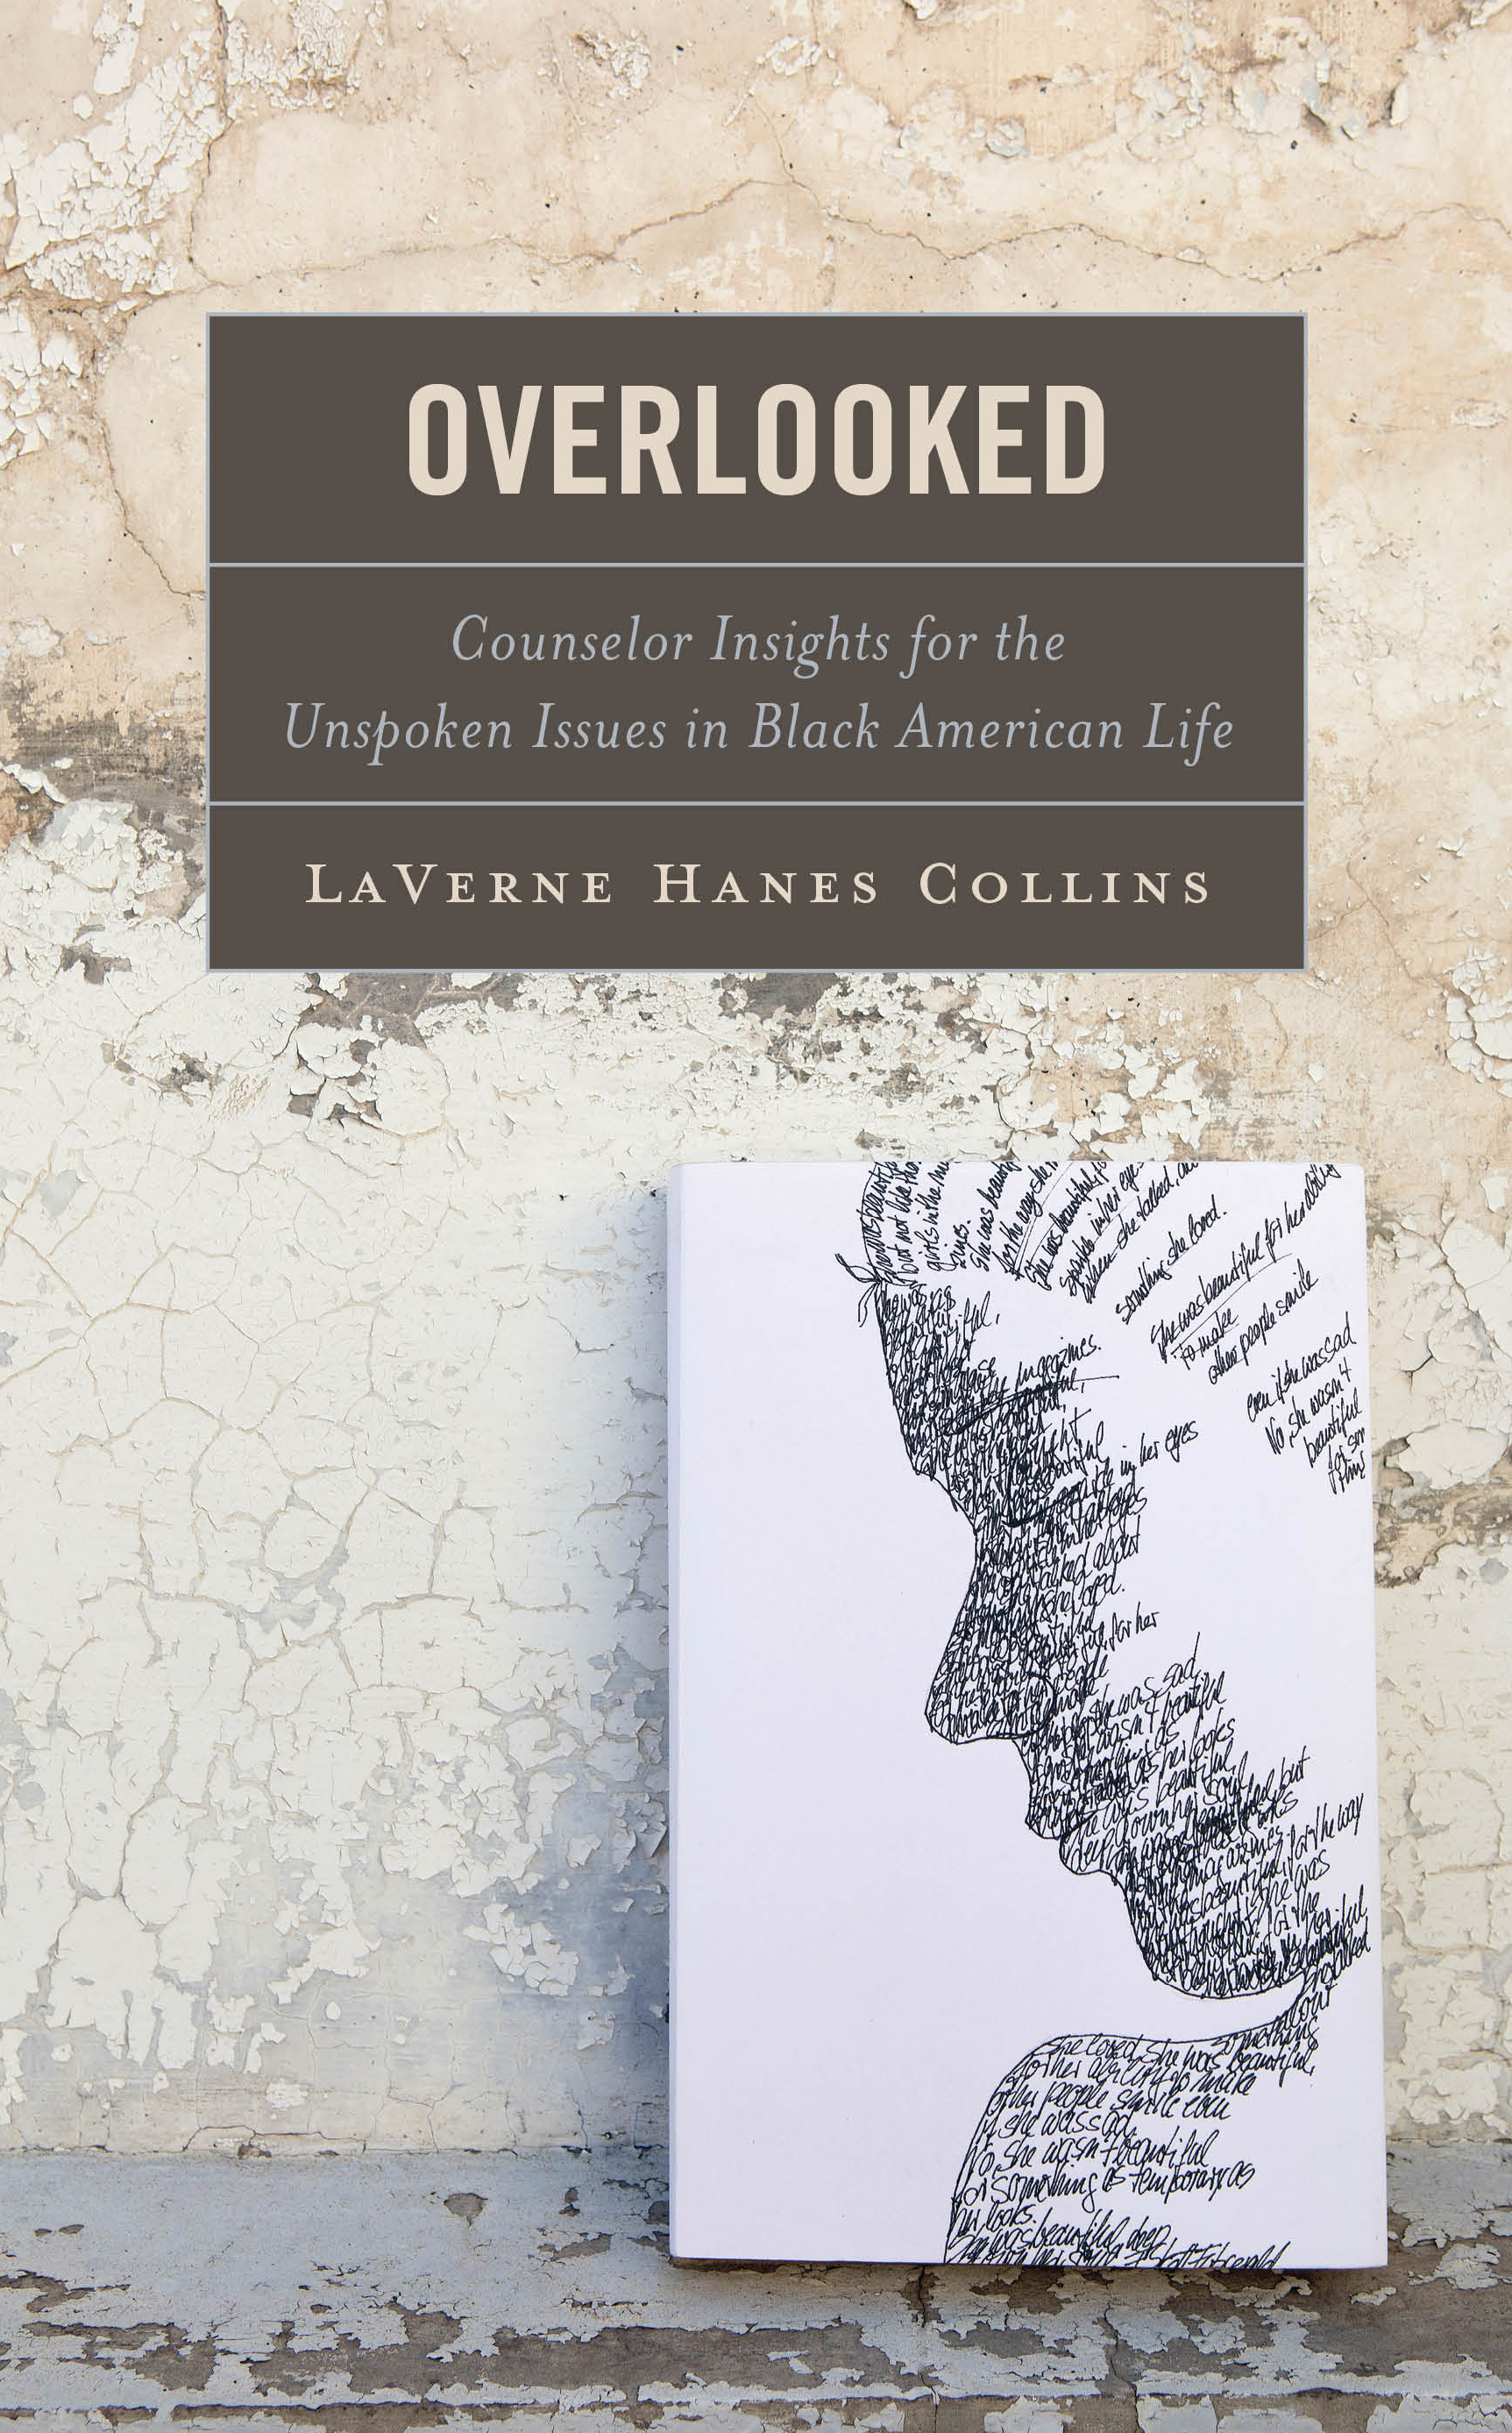 Overlooked: Counselor Insights for the Unspoken Issues in Black American Life